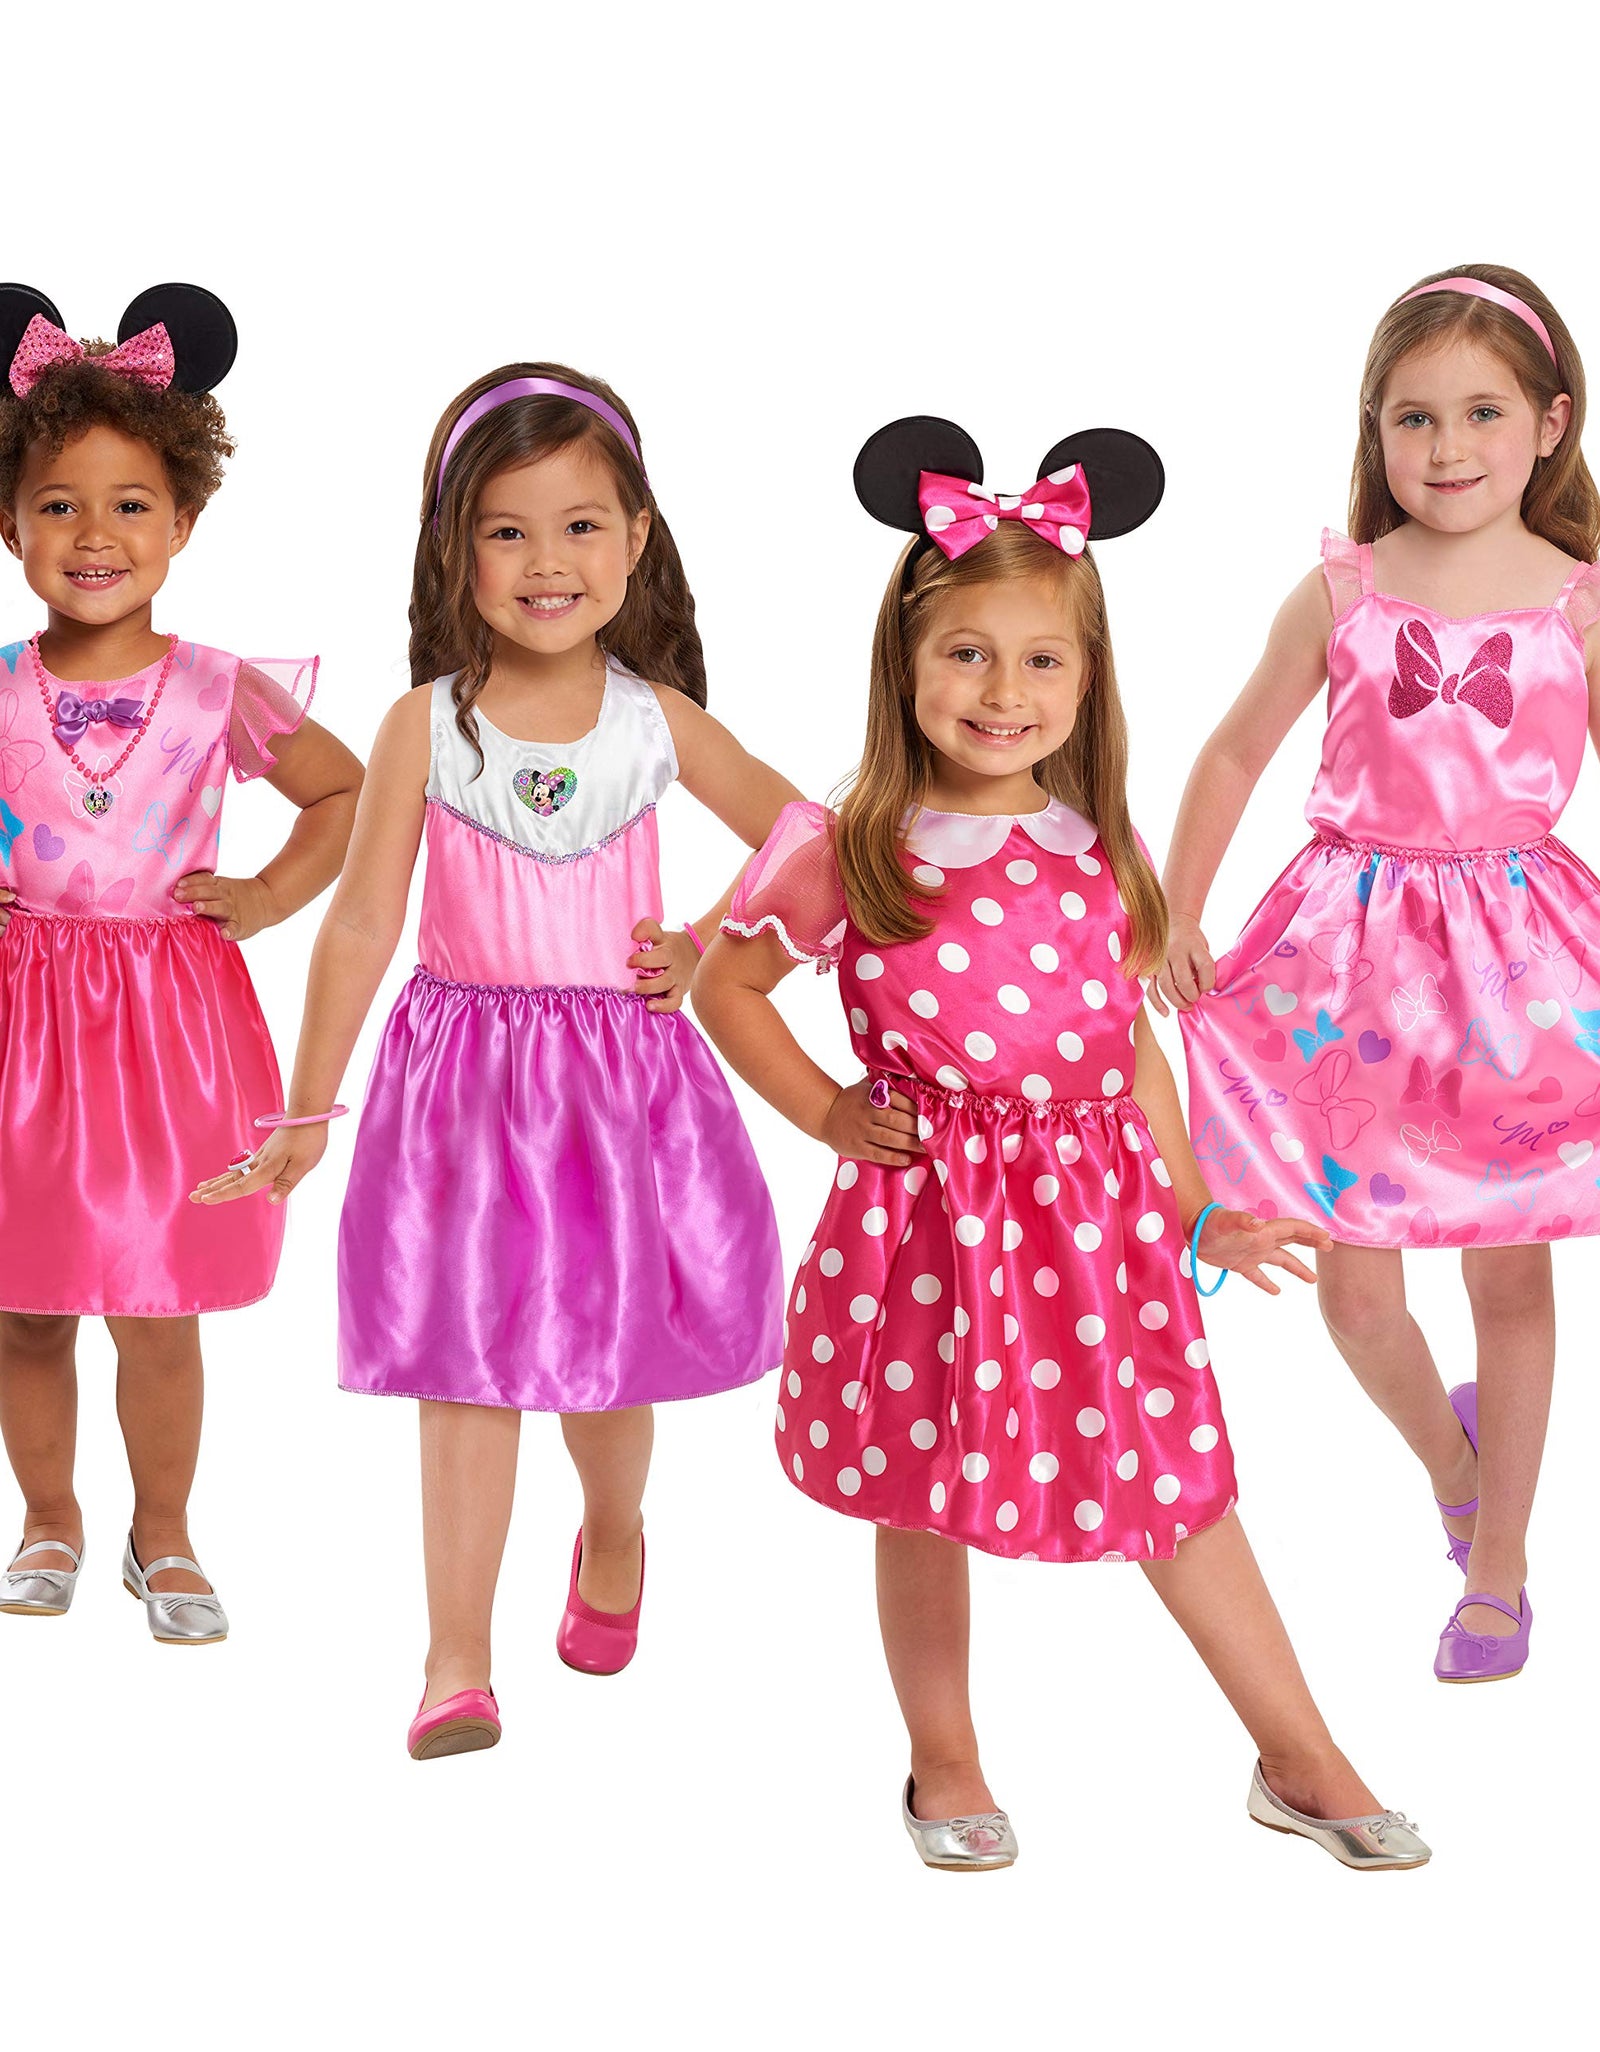 Disney Junior Minnie Mouse Bowdazzling Dress Up Trunk Set, 21 Pieces, Size 4-6x, Amazon Exclusive, by Just Play